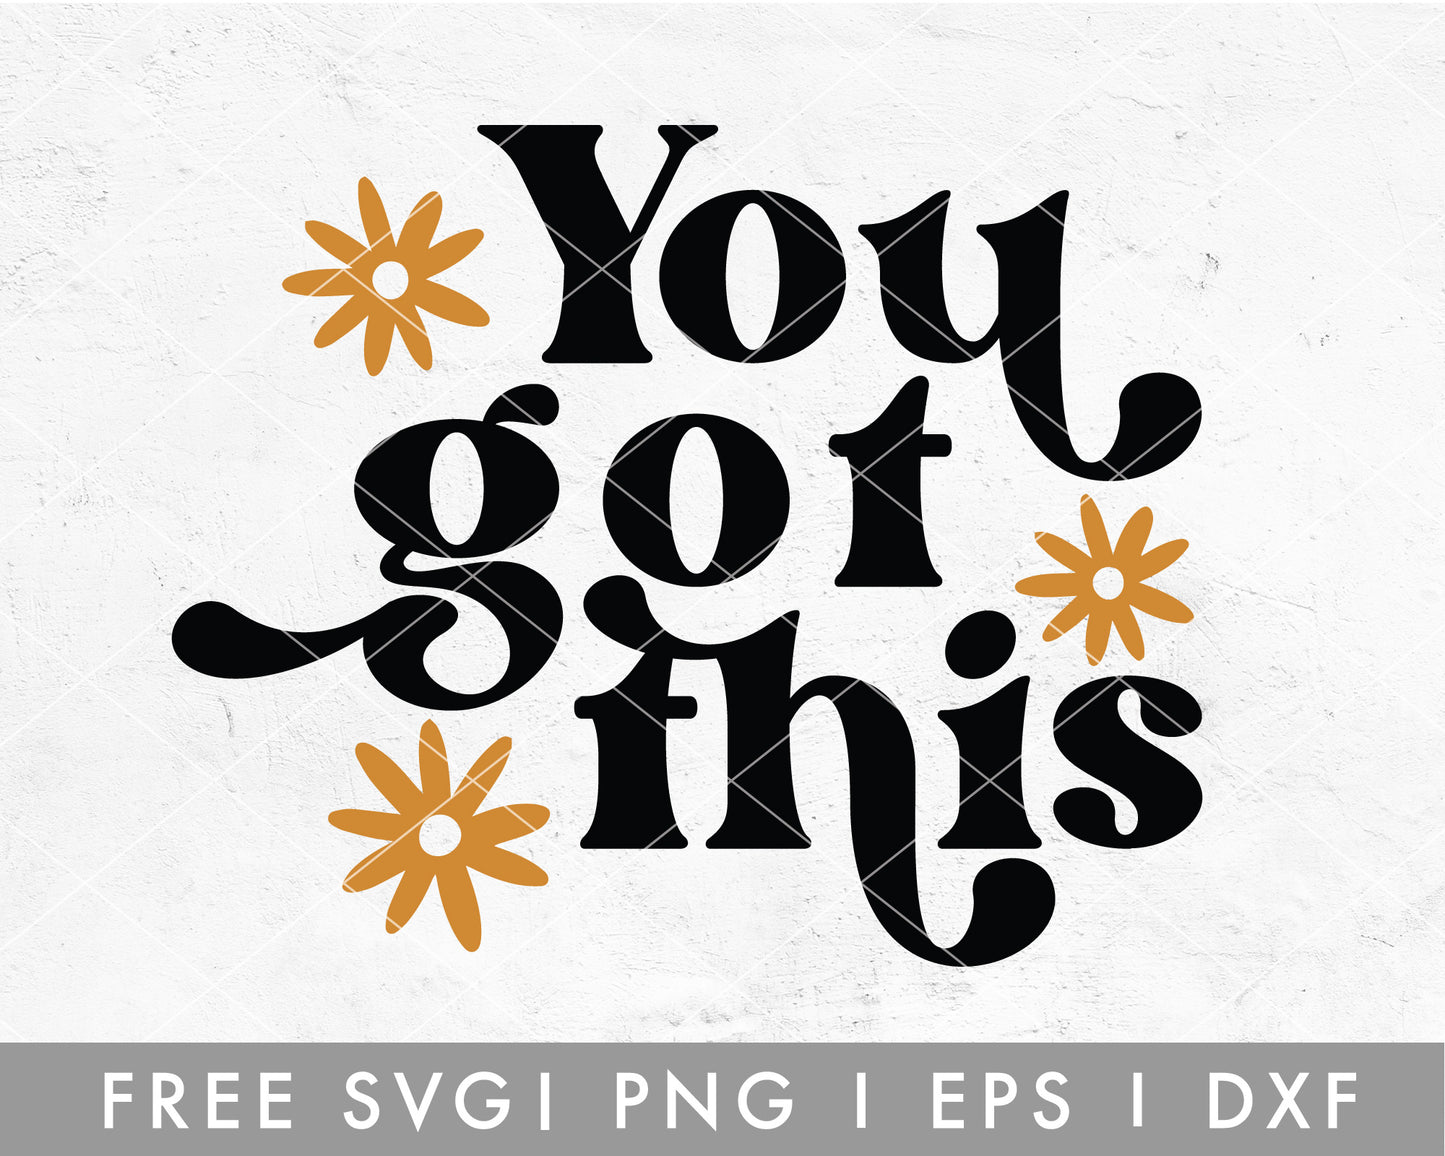 FREE You Got This SVG